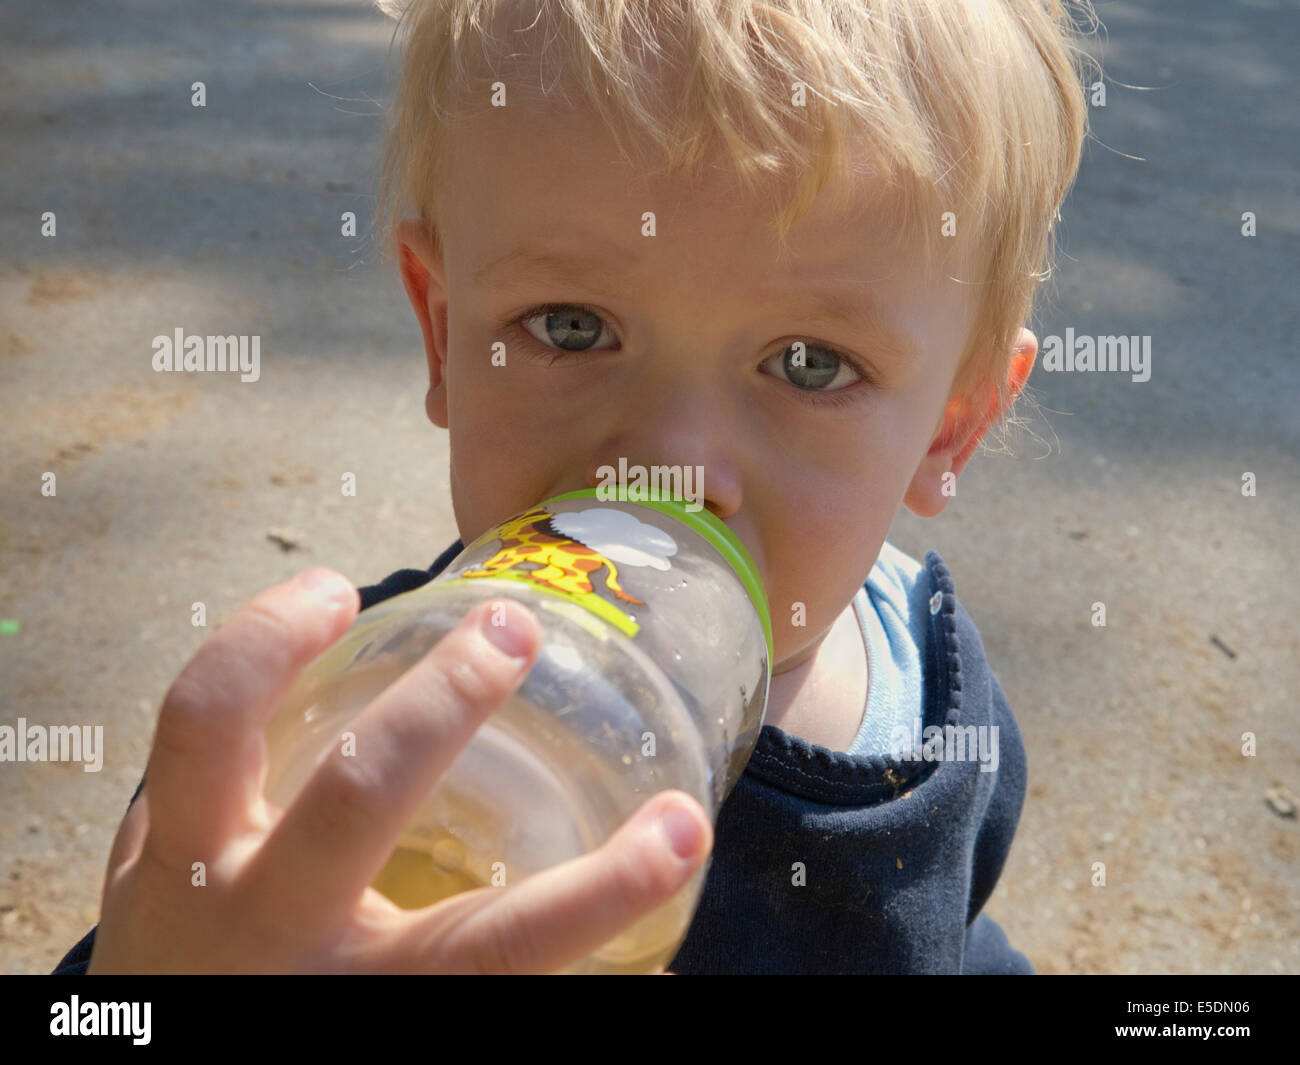 Baby boy drinking from bottle Stock Photo